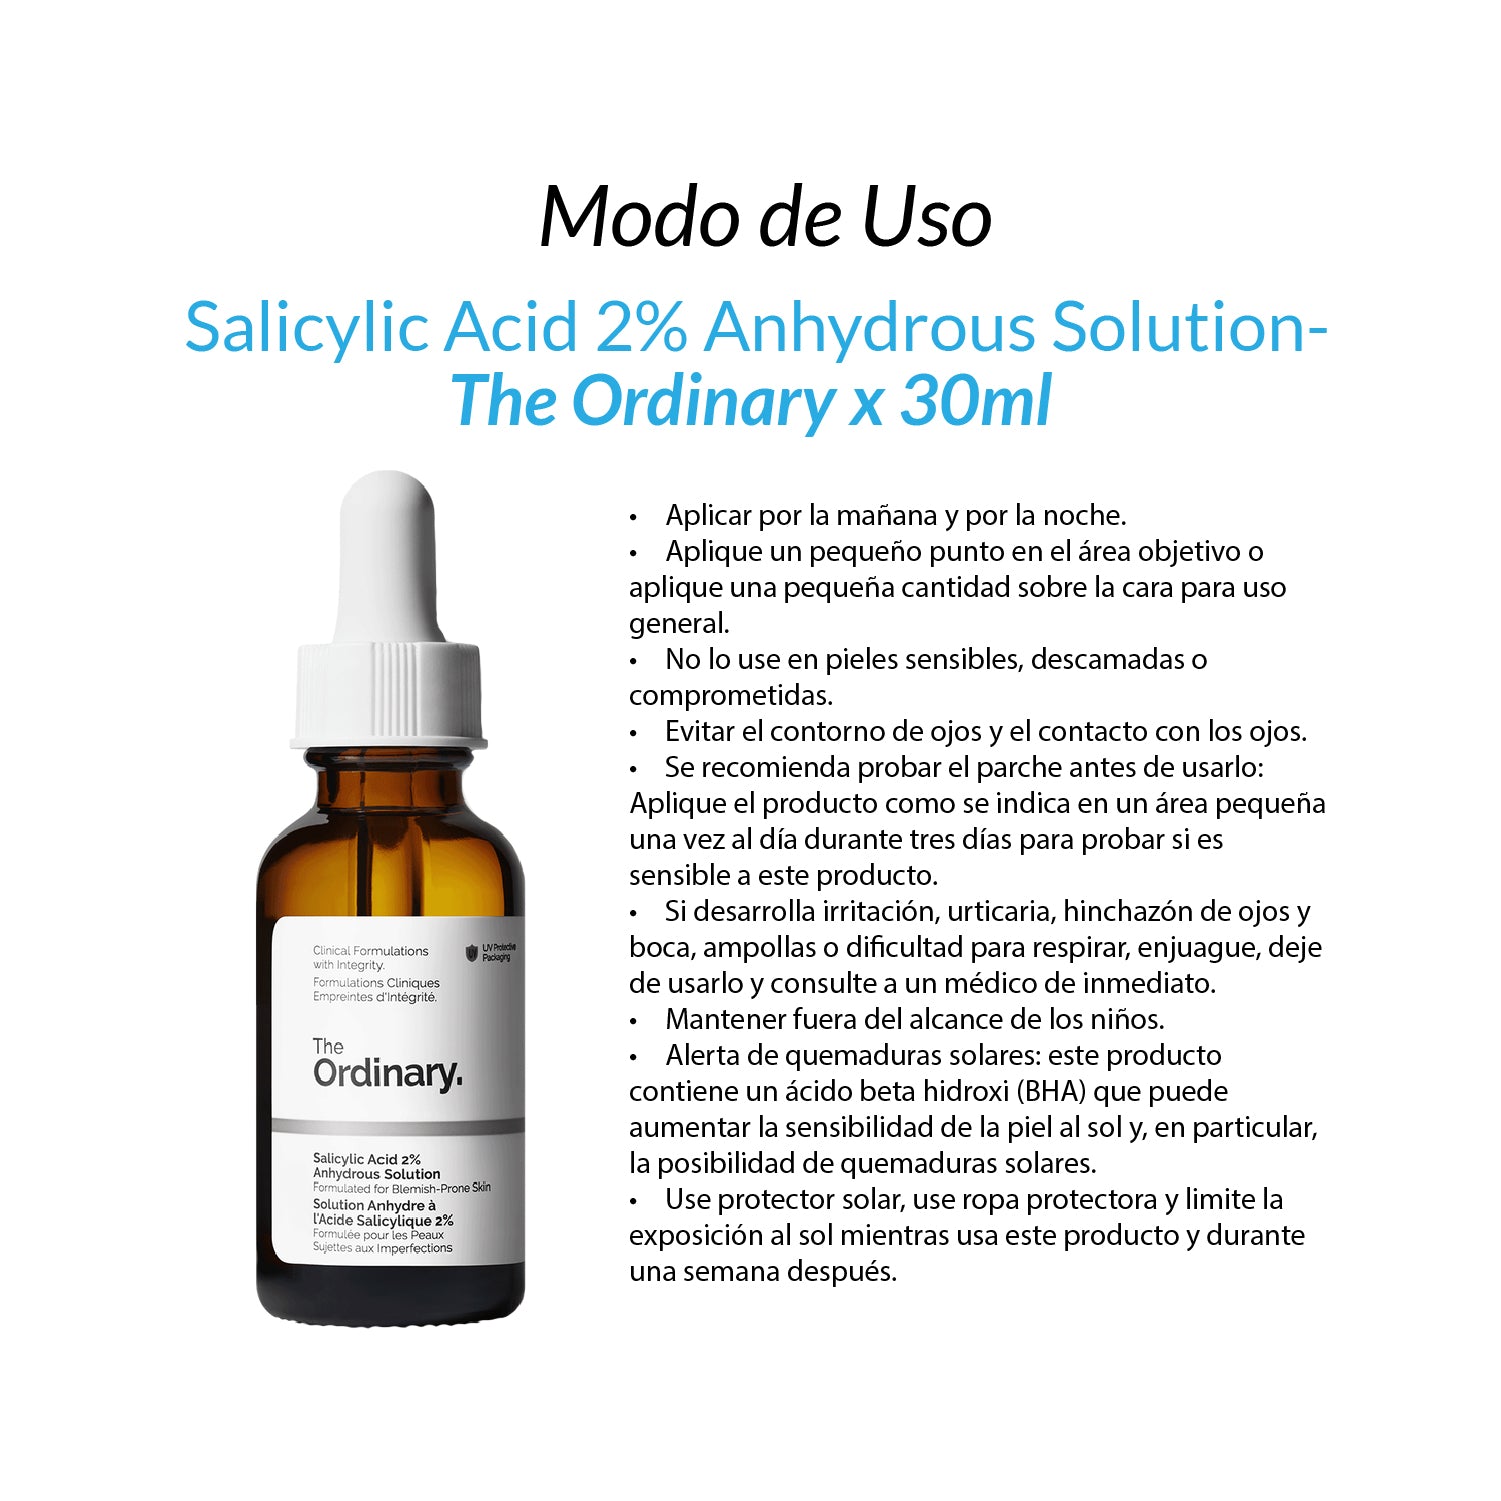 Salicylic Acid 2% Anhydrous Solution - The Ordinary 30ml